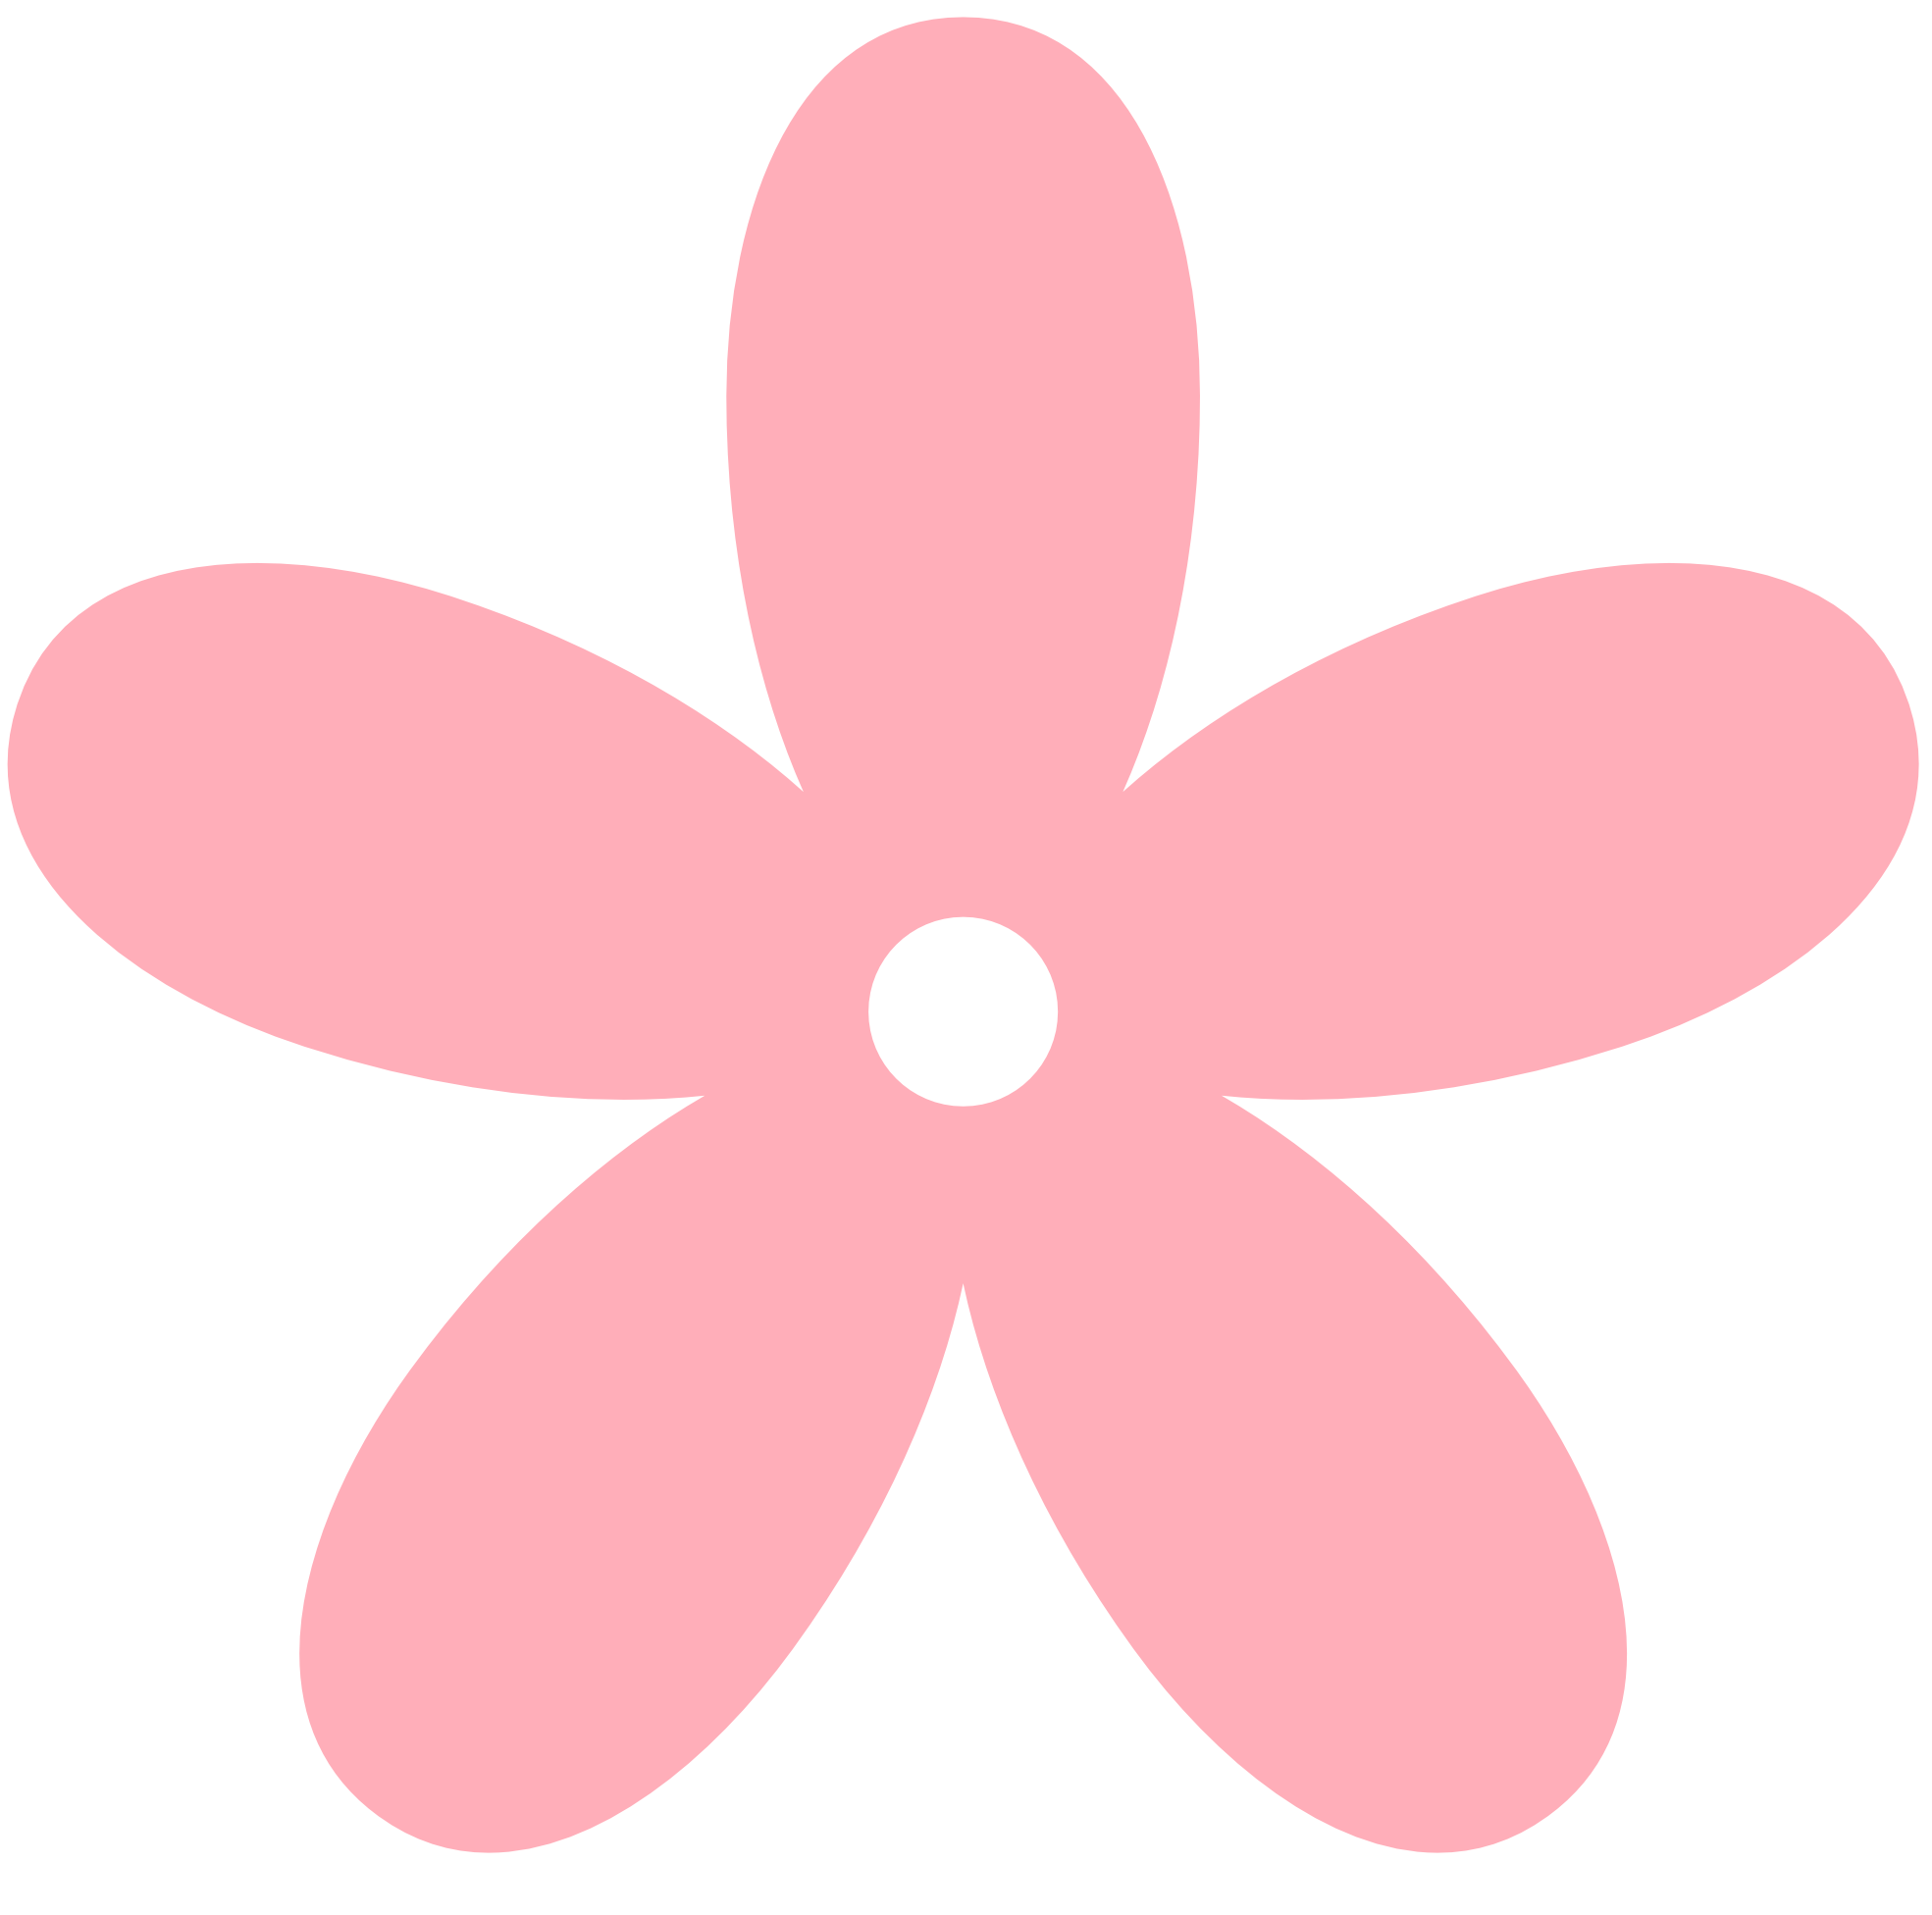 Pink Flower Clipart | Clipart Panda - Free Clipart Images